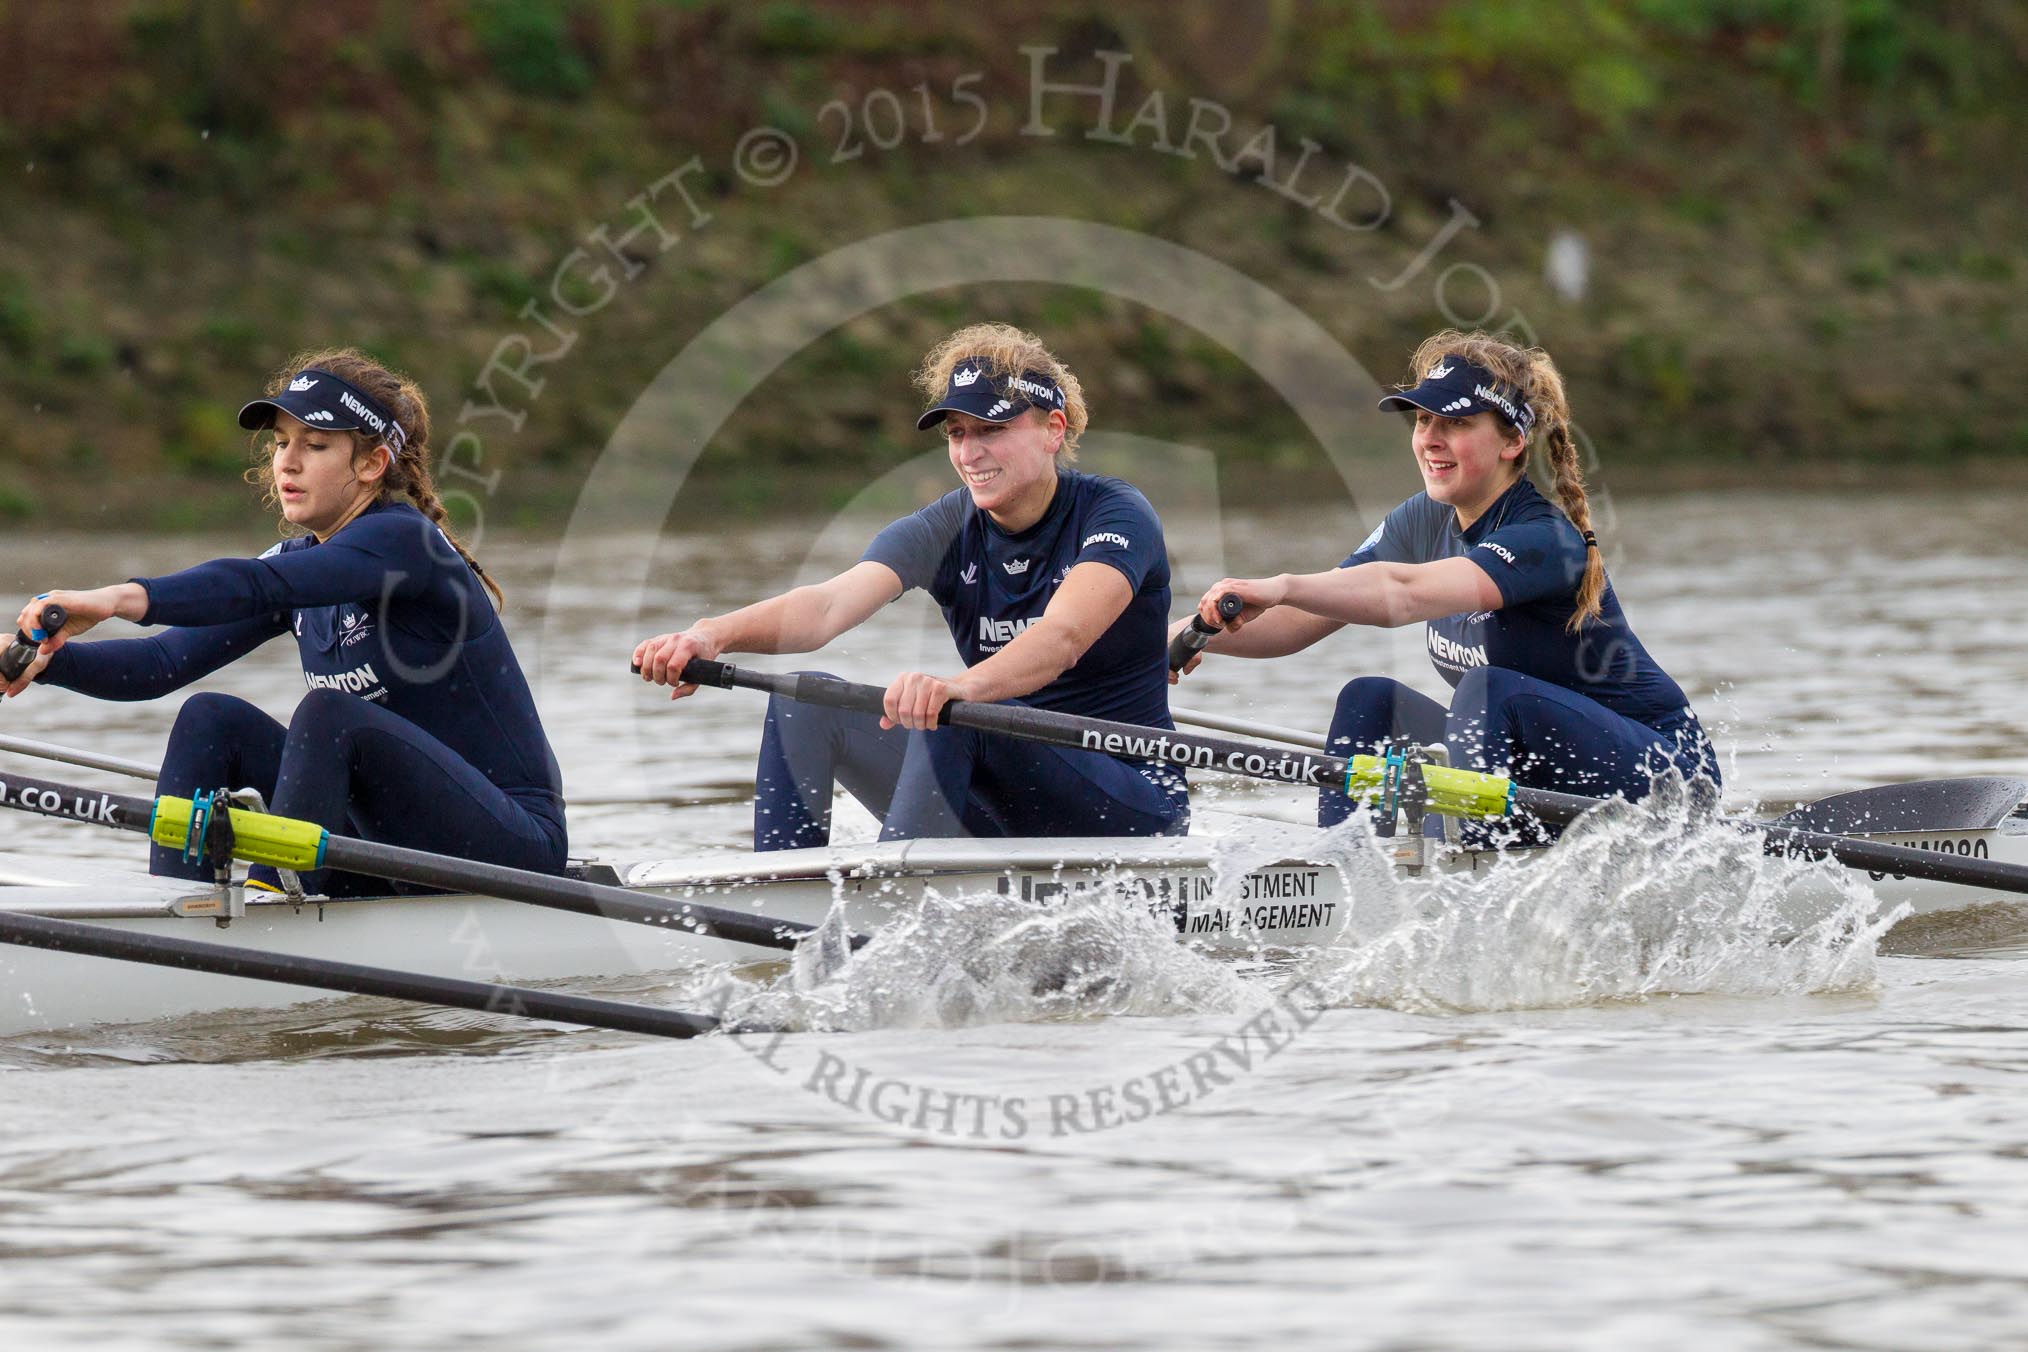 The Boat Race season 2016 - Women's Boat Race Trial Eights (OUWBC, Oxford): "Scylla", here 3-Elettra Ardissino, 2-Merel Lefferts, bow-Issy Dodds.
River Thames between Putney Bridge and Mortlake,
London SW15,

United Kingdom,
on 10 December 2015 at 12:20, image #165